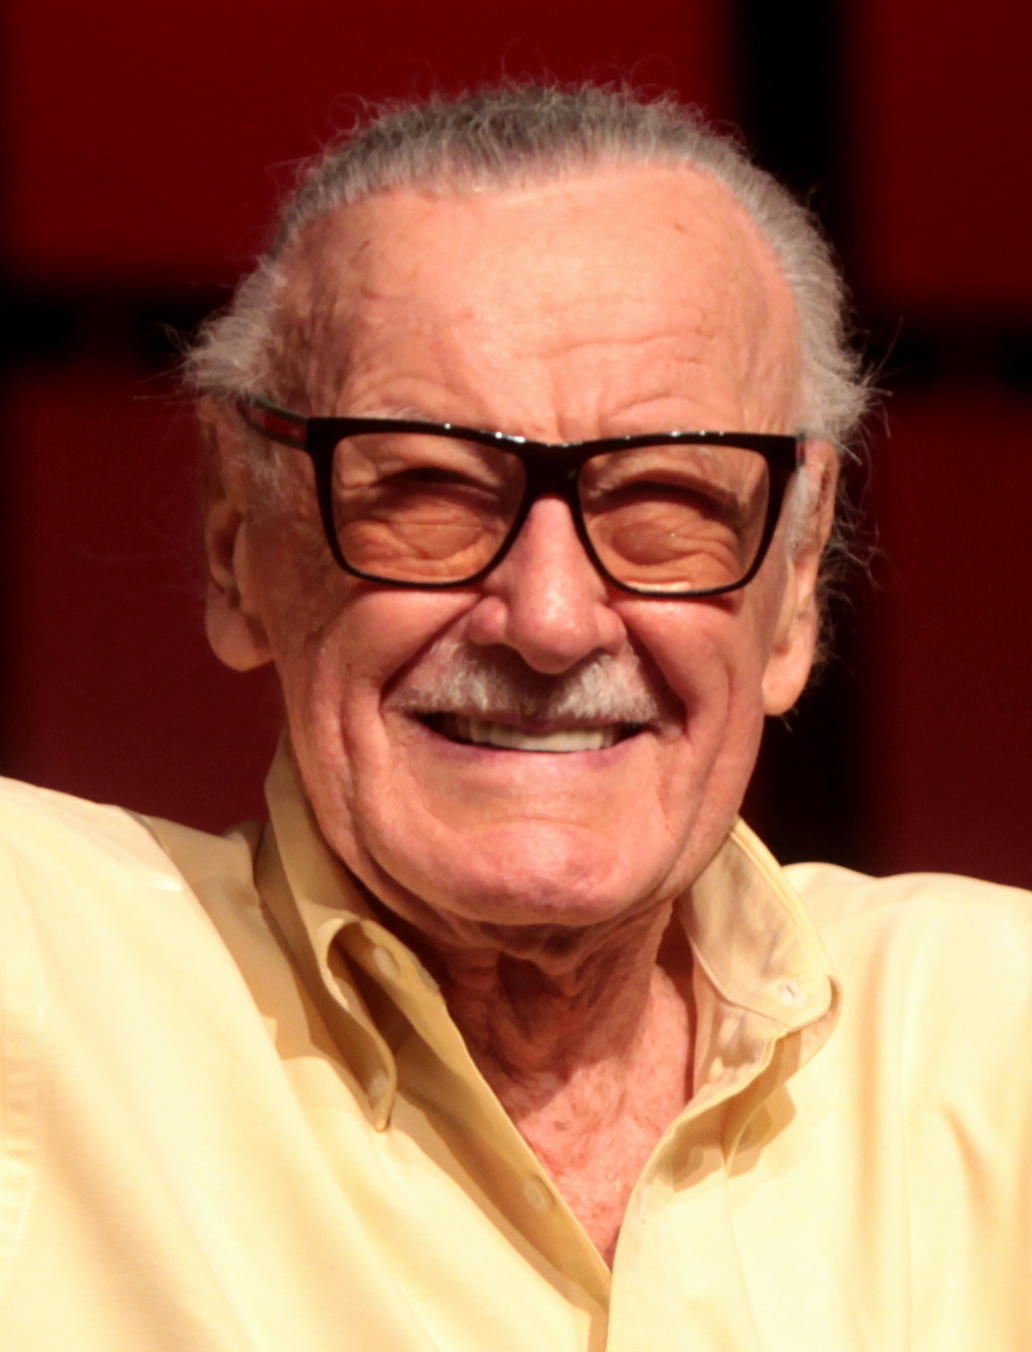 I’ve also met Stan Lee, twice actually (two different comic con years) At the first I got my picture taken with him and were instructed not to touch or talk to him. When I walked in (probably 15 years old at the time) he sweetly smiled and said hi The second time I got that picture autographed and he was kind to both me and my father, so great to meet a legend like him (RIP Stan)